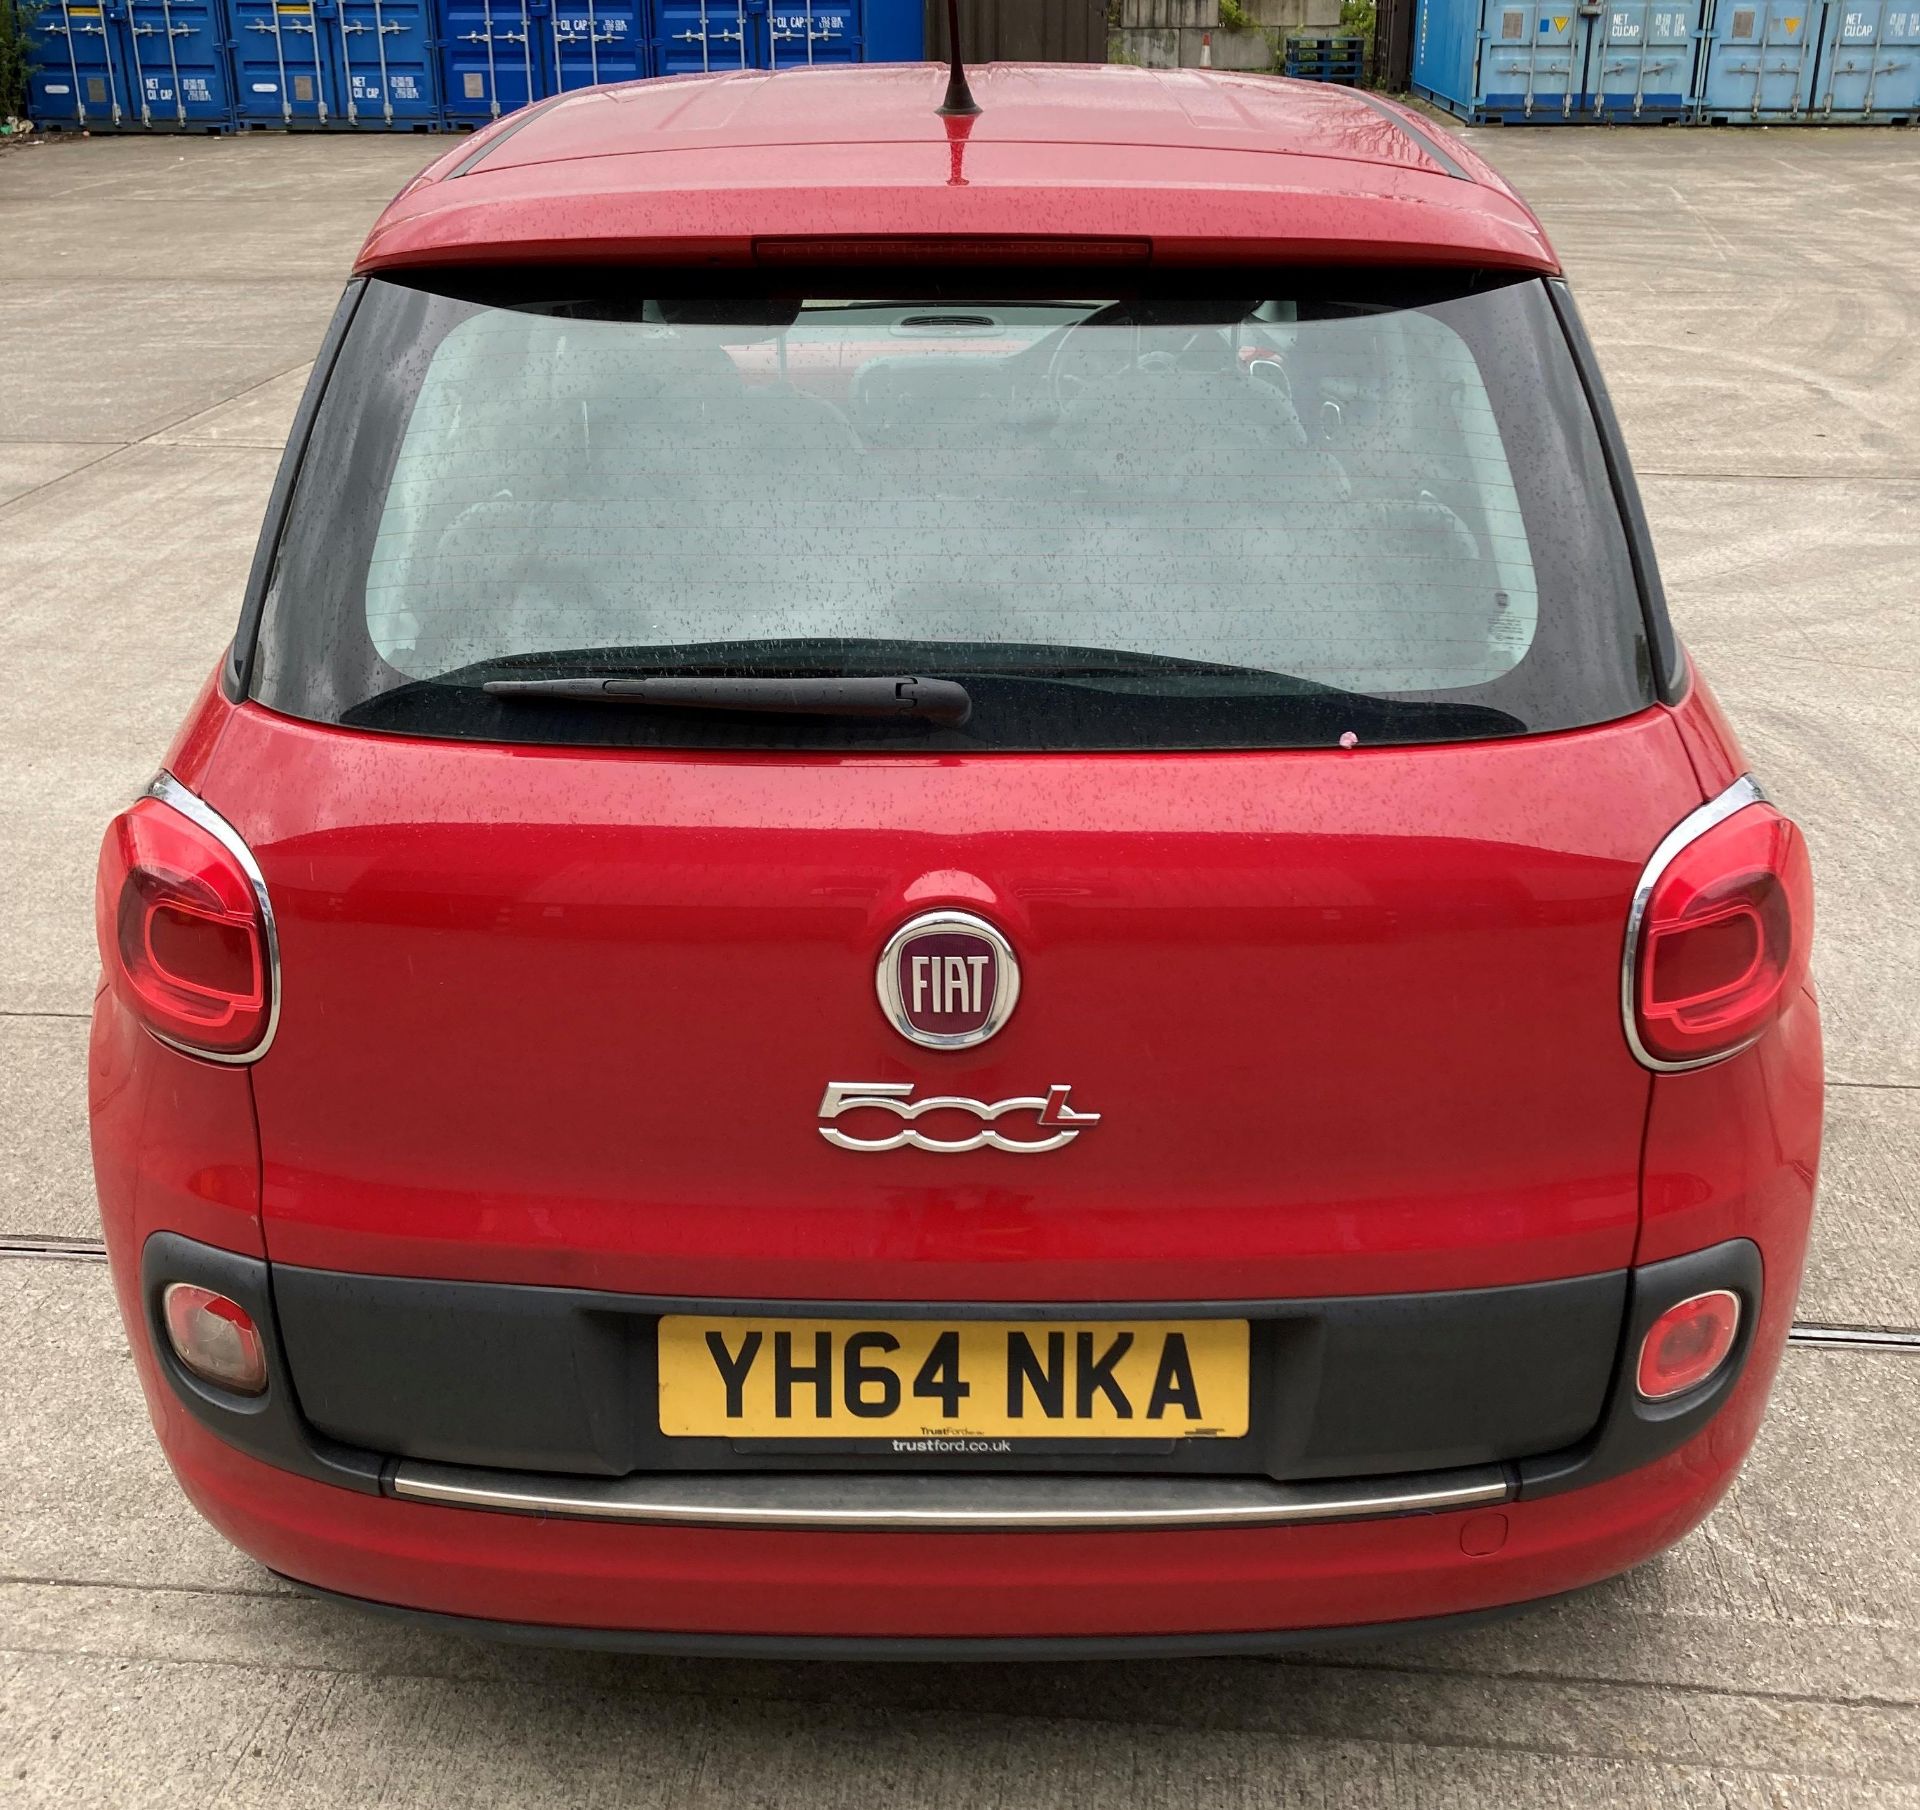 FIAT 500L POP STAR MULTI-JET 1.2 MPV - DIESEL - RED. On the instructions of: A retained client. - Image 5 of 16